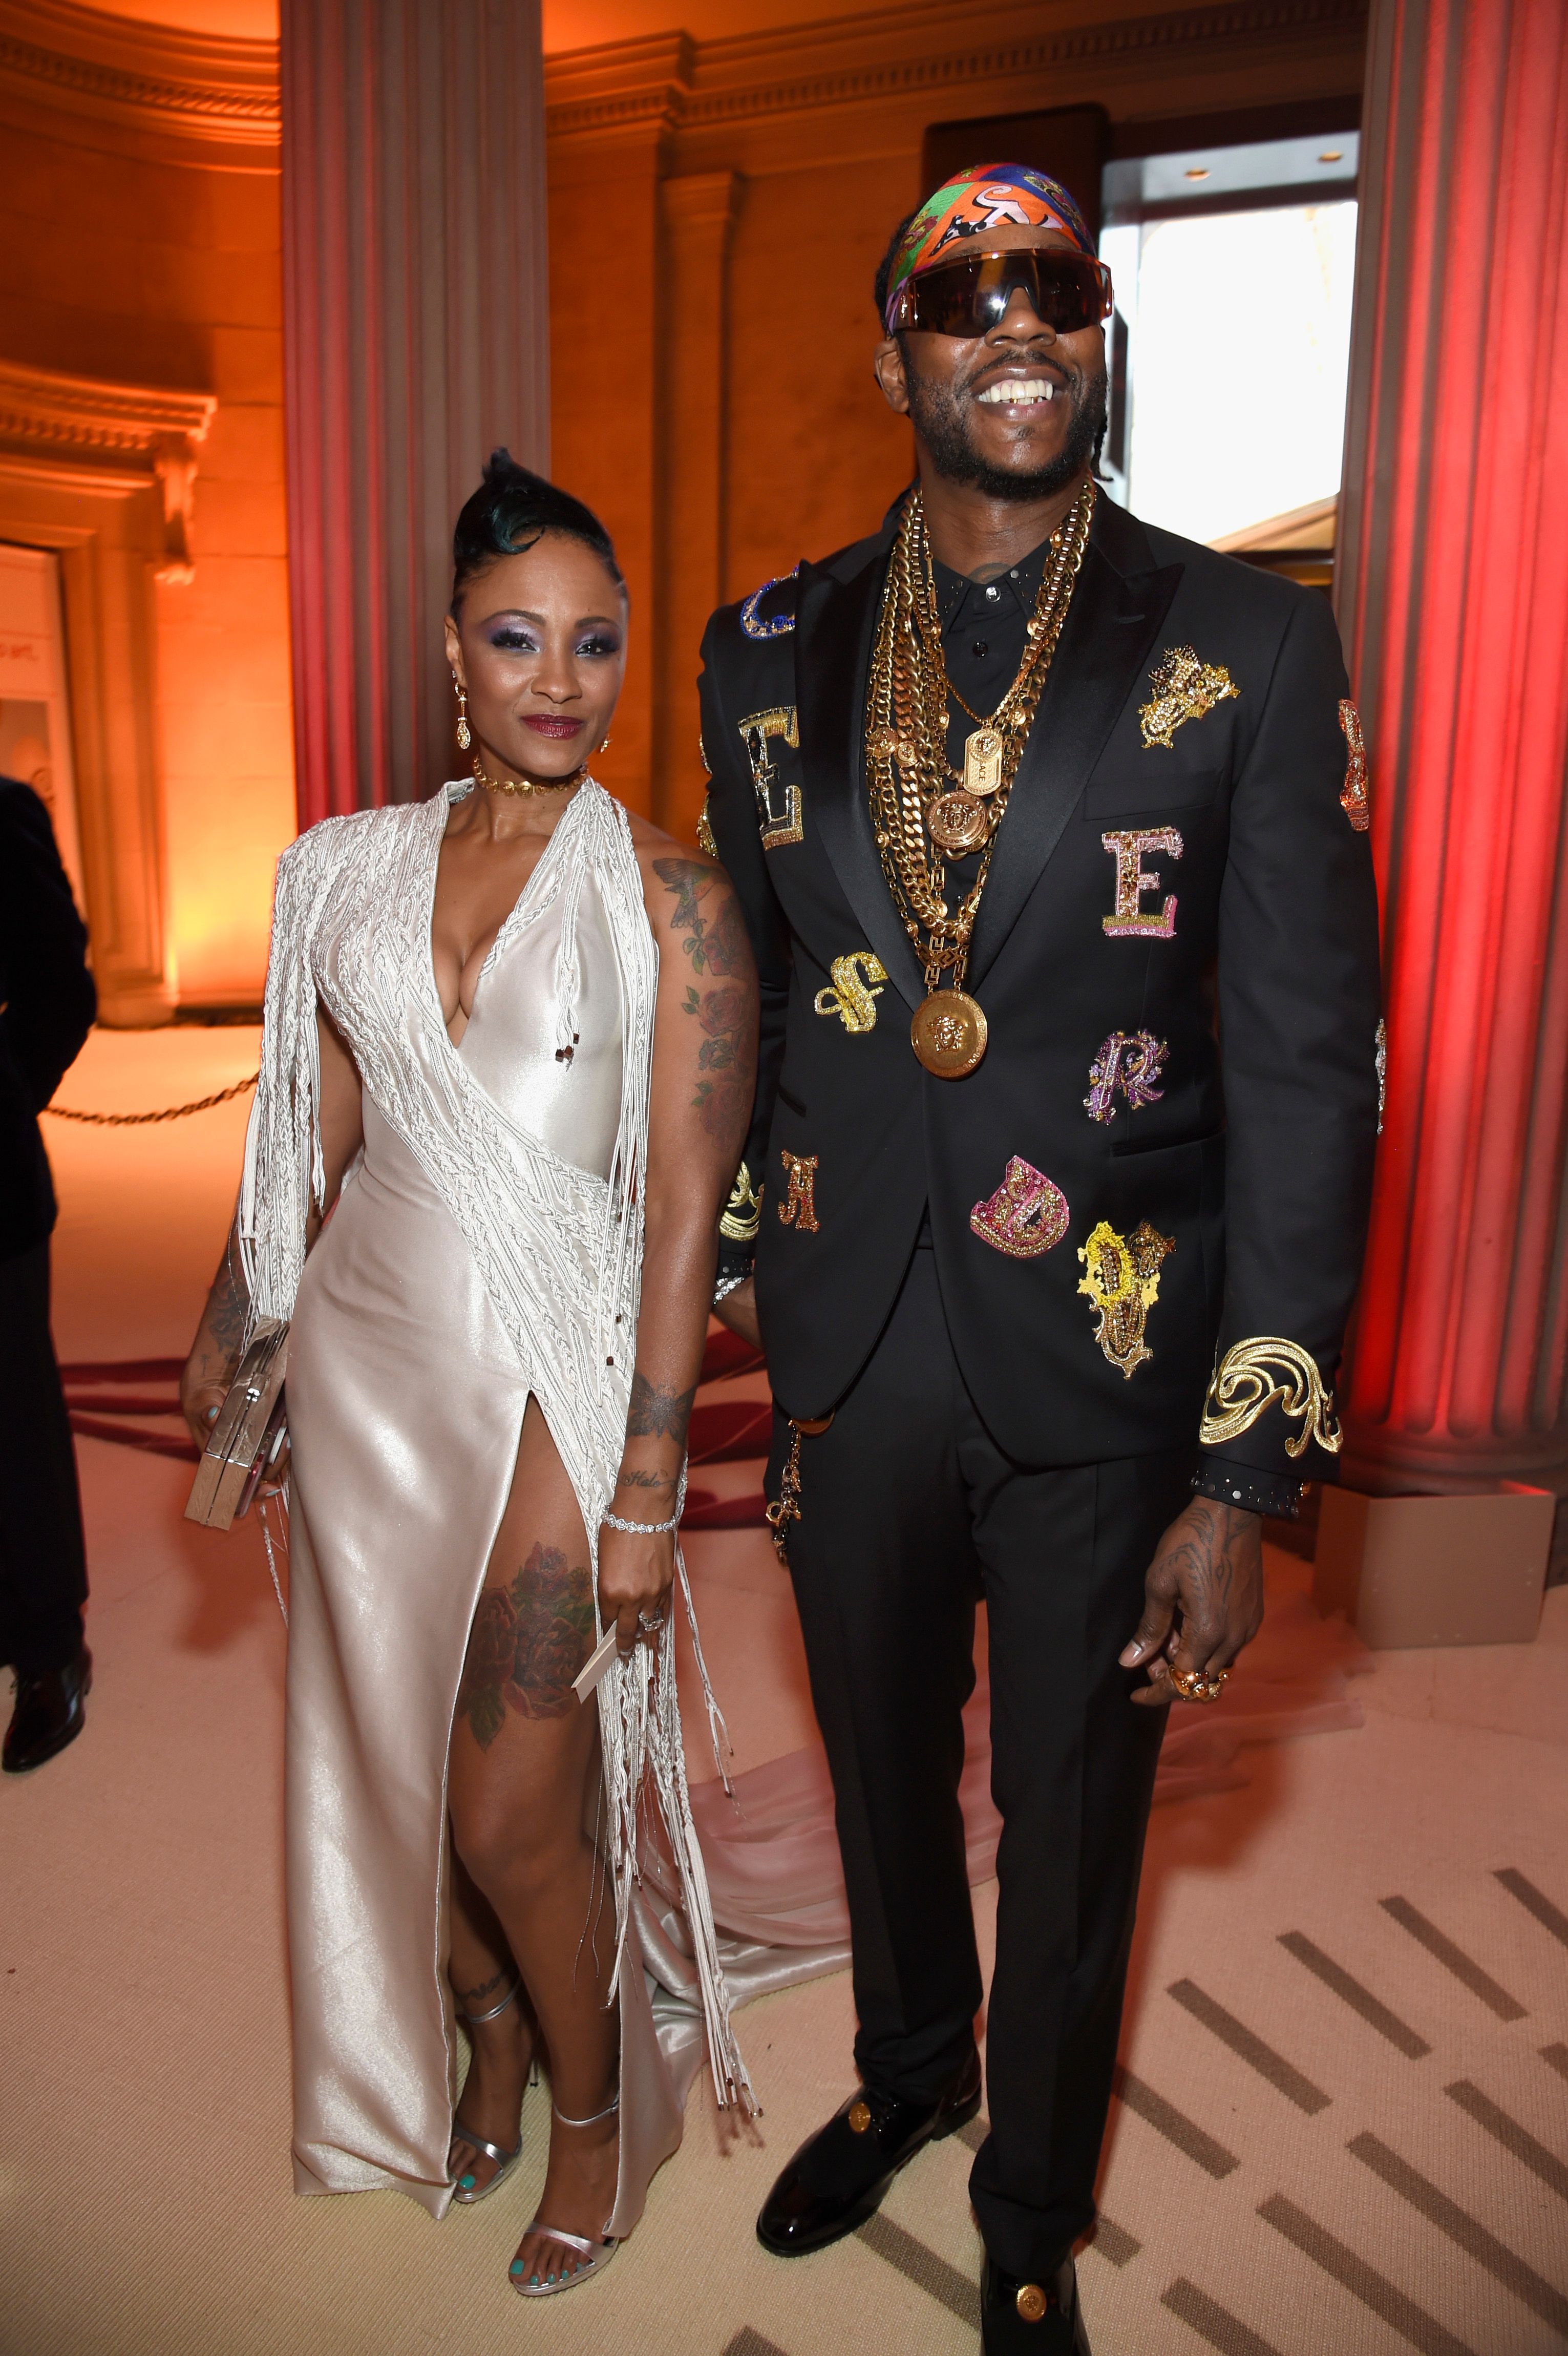 Kesha Ward and 2 Chainz at the Heavenly Bodies: Fashion & The Catholic Imagination Costume Institute Gala on May 7, 2018, in New York City. | Source: Getty Images